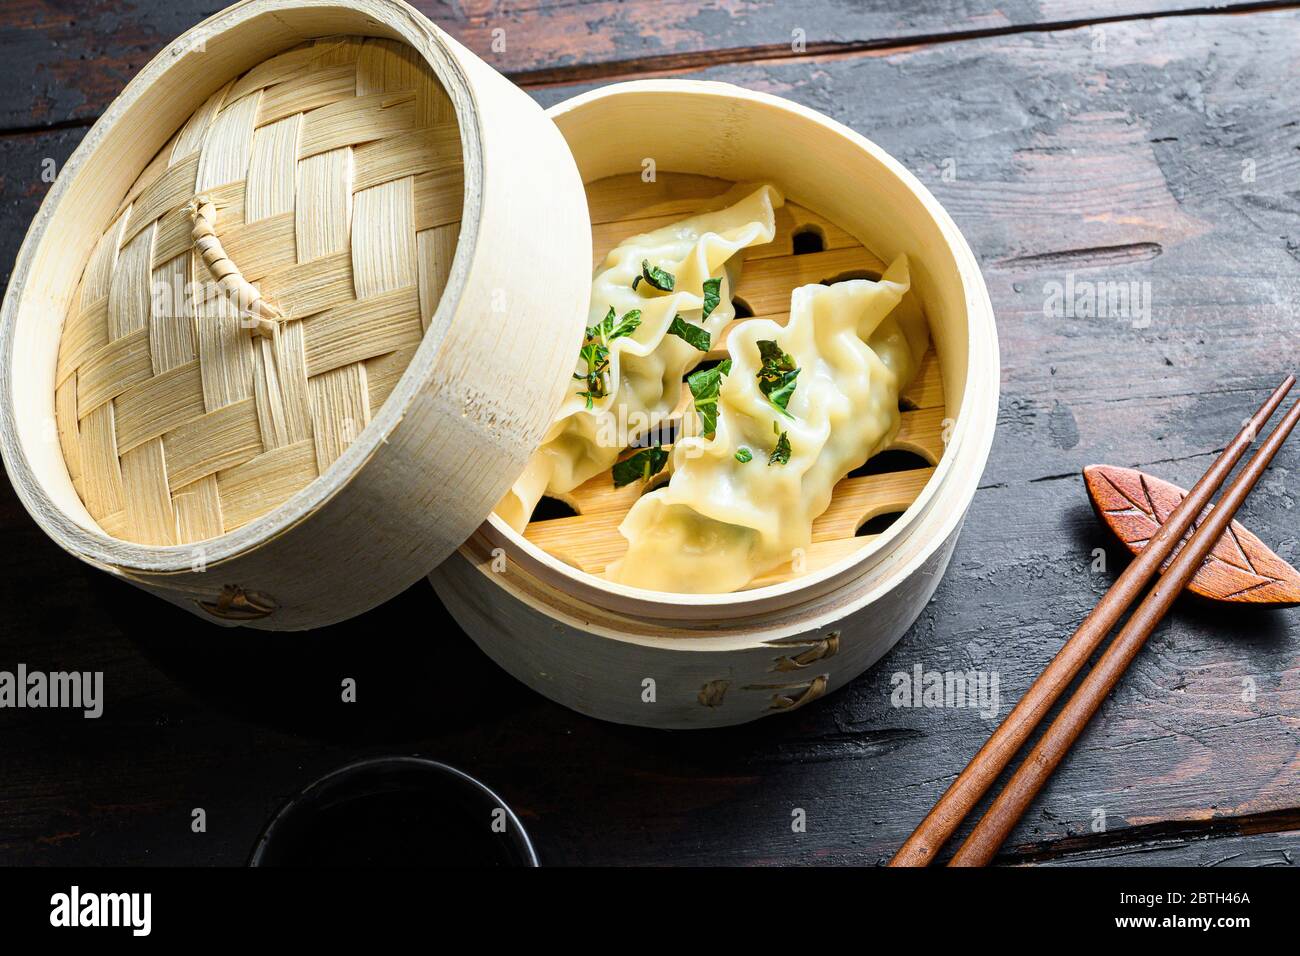 Gyozas potstickers chinese dumplings in wooden steamer with soy sauce fresh herbs and chopsticks on old wood table side view close-up. Stock Photo